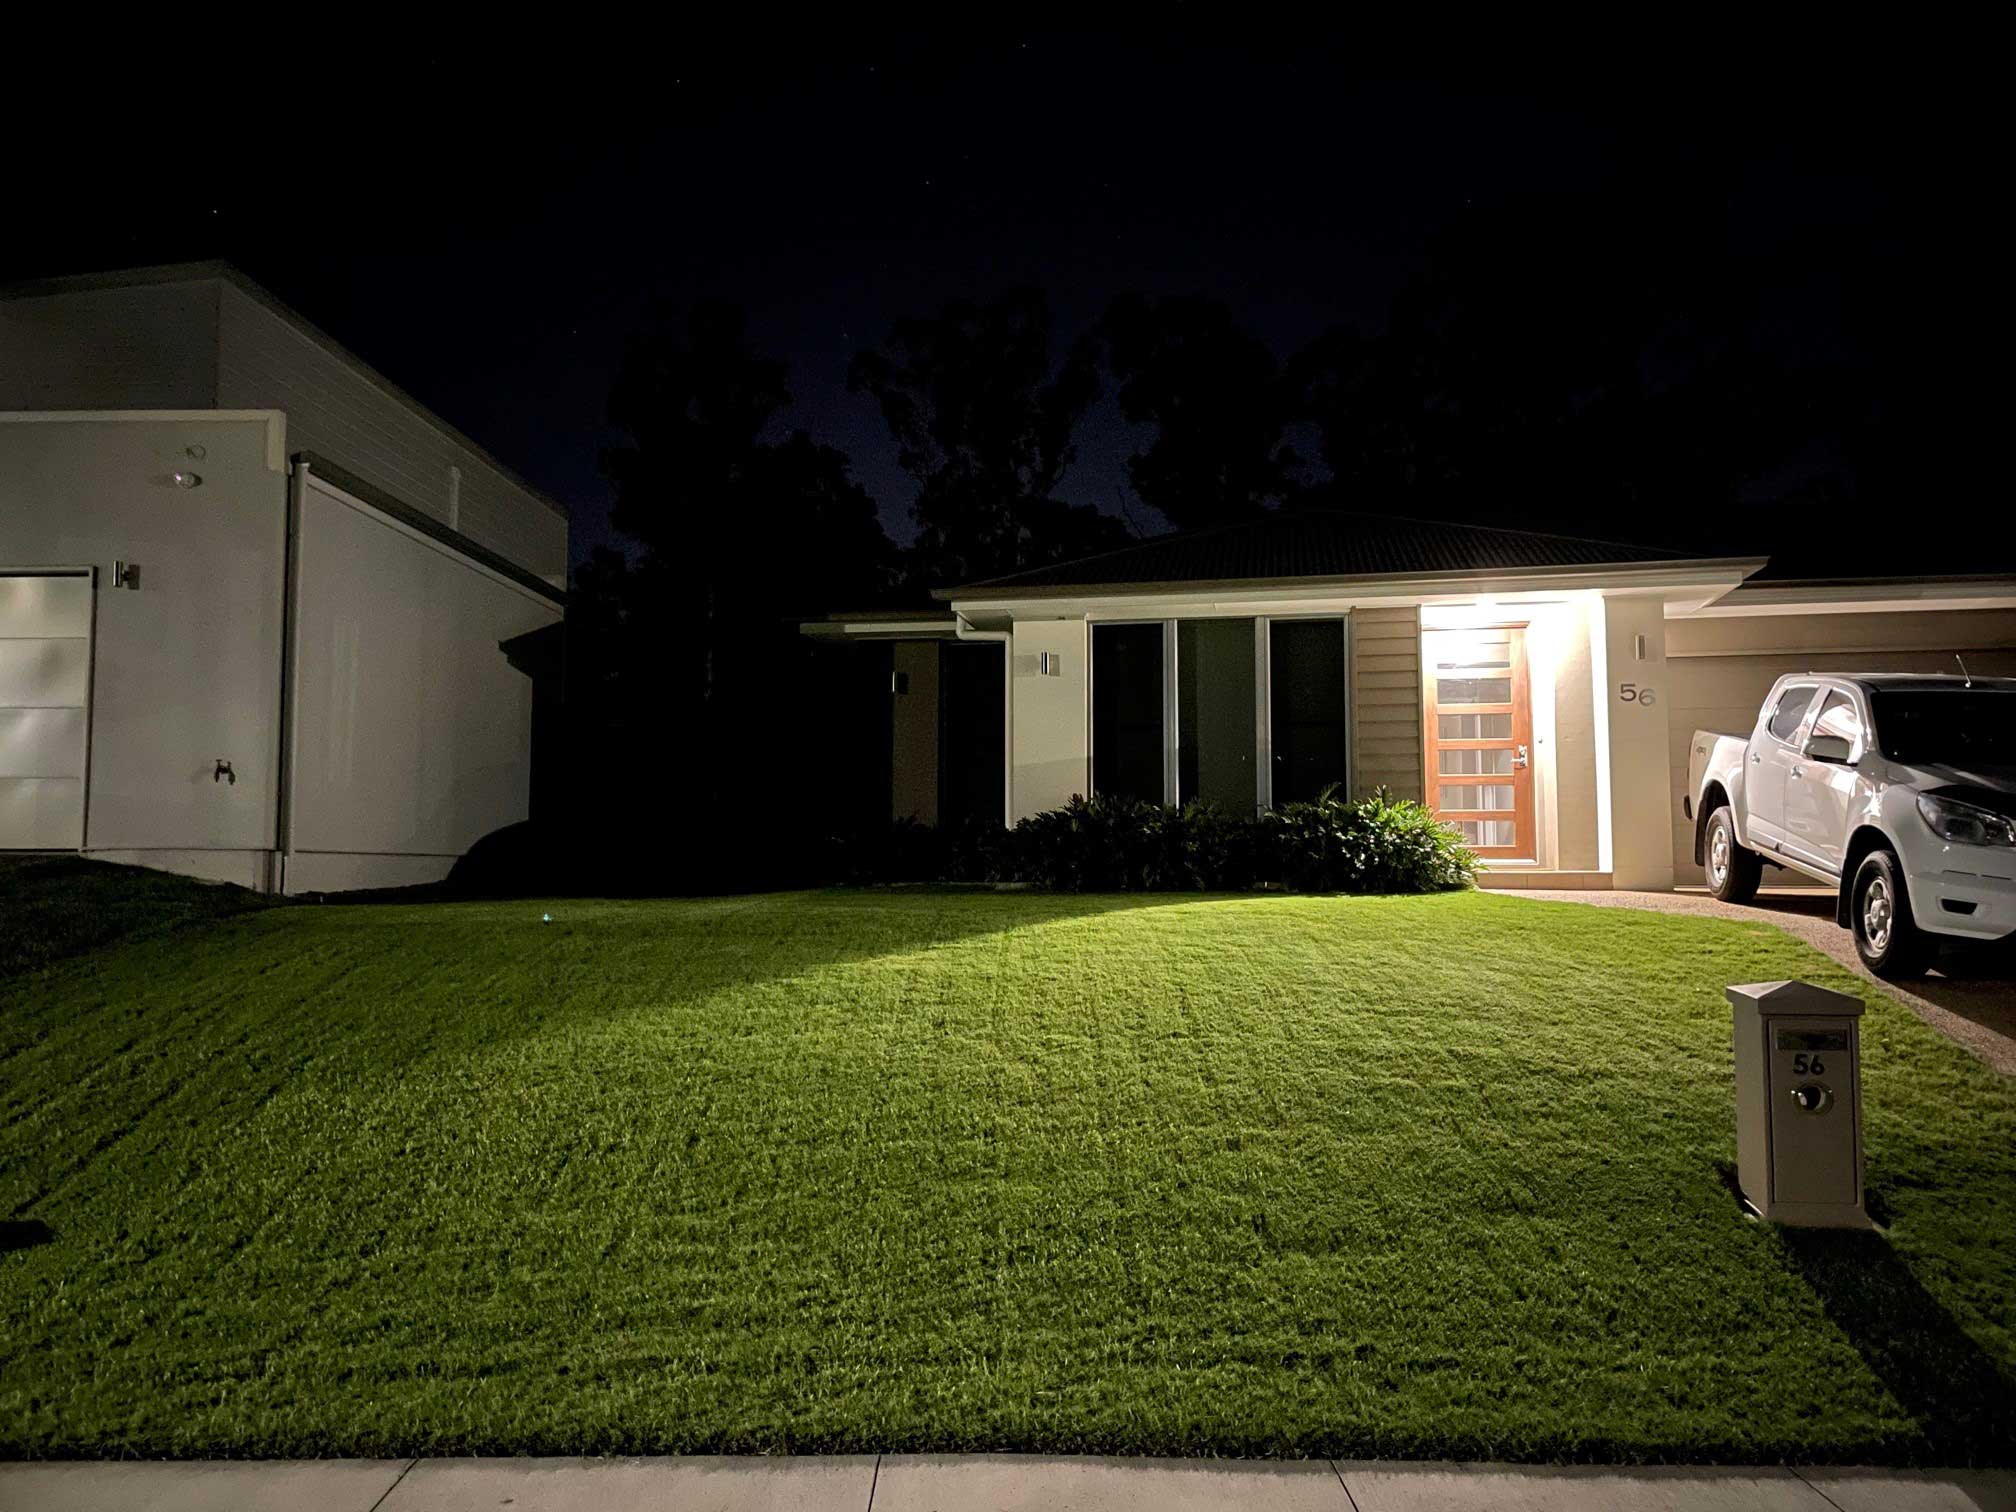 Wintergreen-Couch-Turf-Grass-Lawn-at-night-front-of-house-w